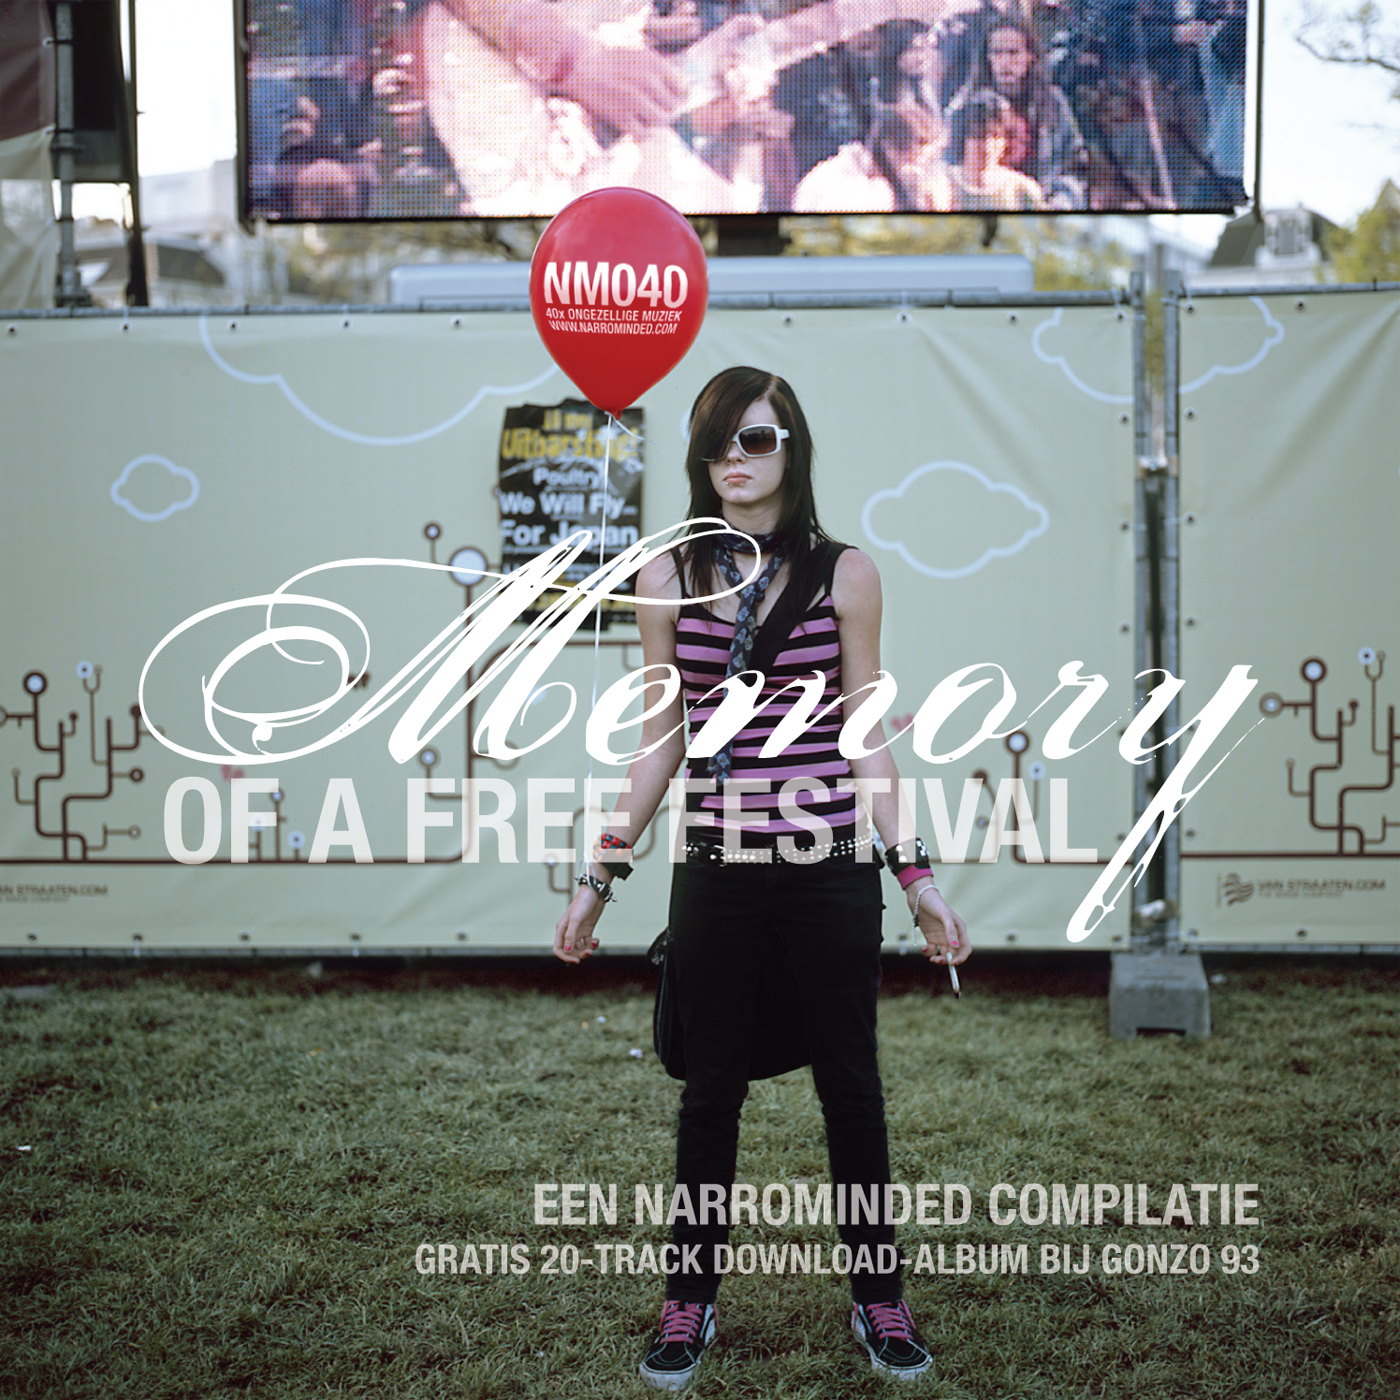 NM040: memory of a free festival - een narrominded compilatie